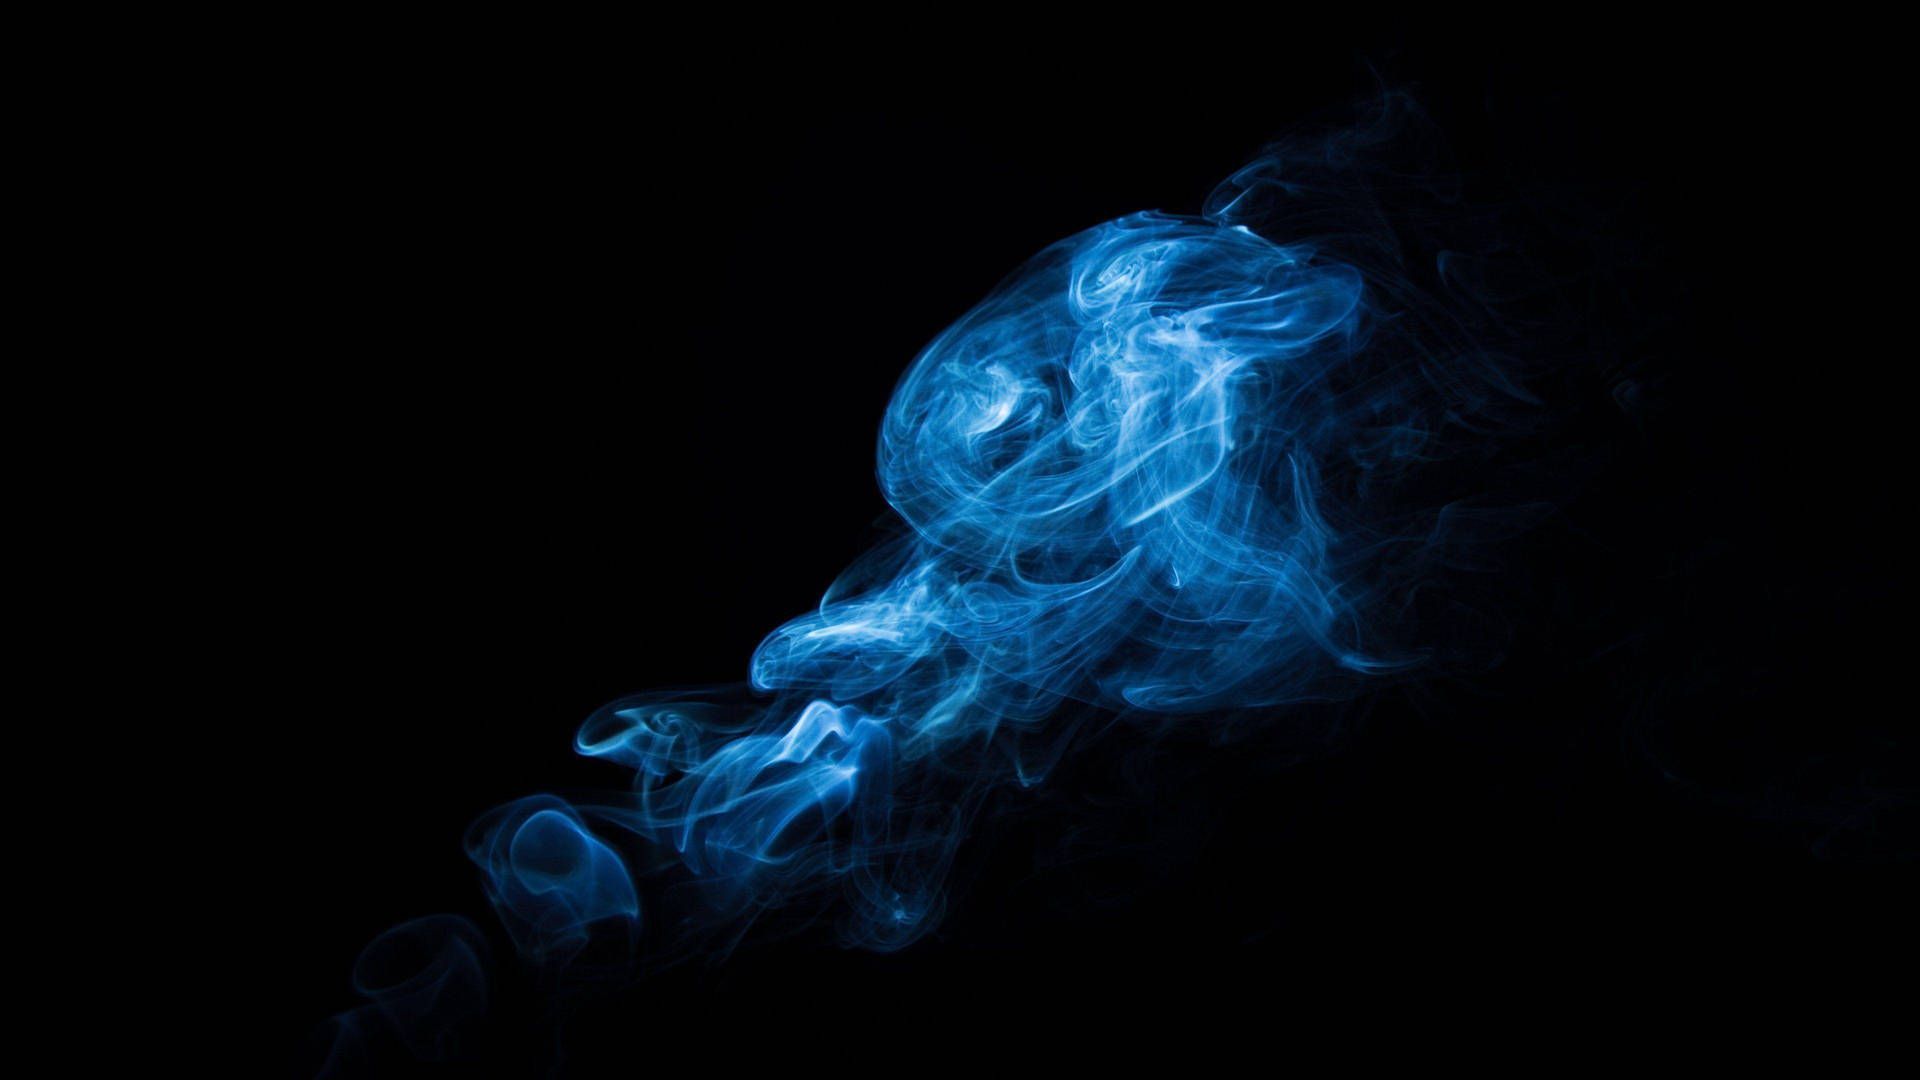 A blue smoke is blowing in the air - Smoke